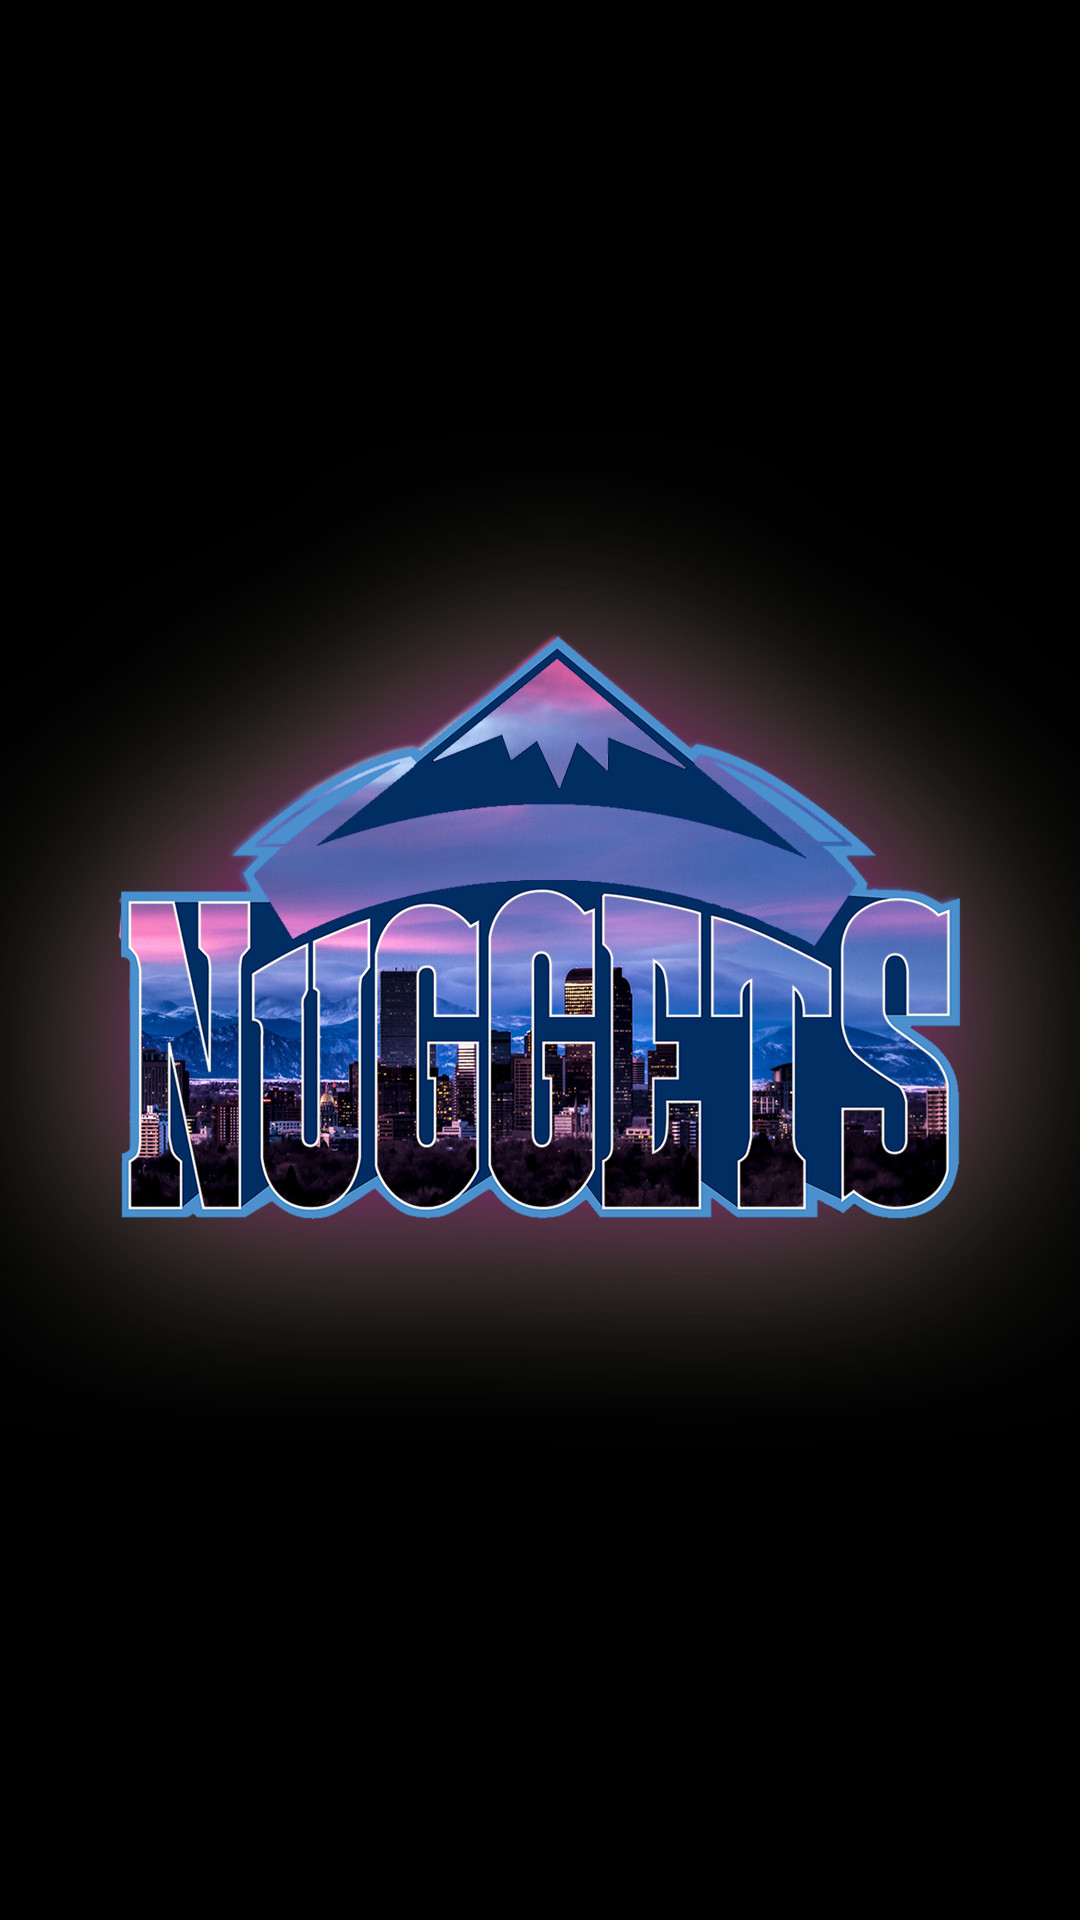 Denver nuggets wallpaper for iPhone and Android I made : denvernuggets